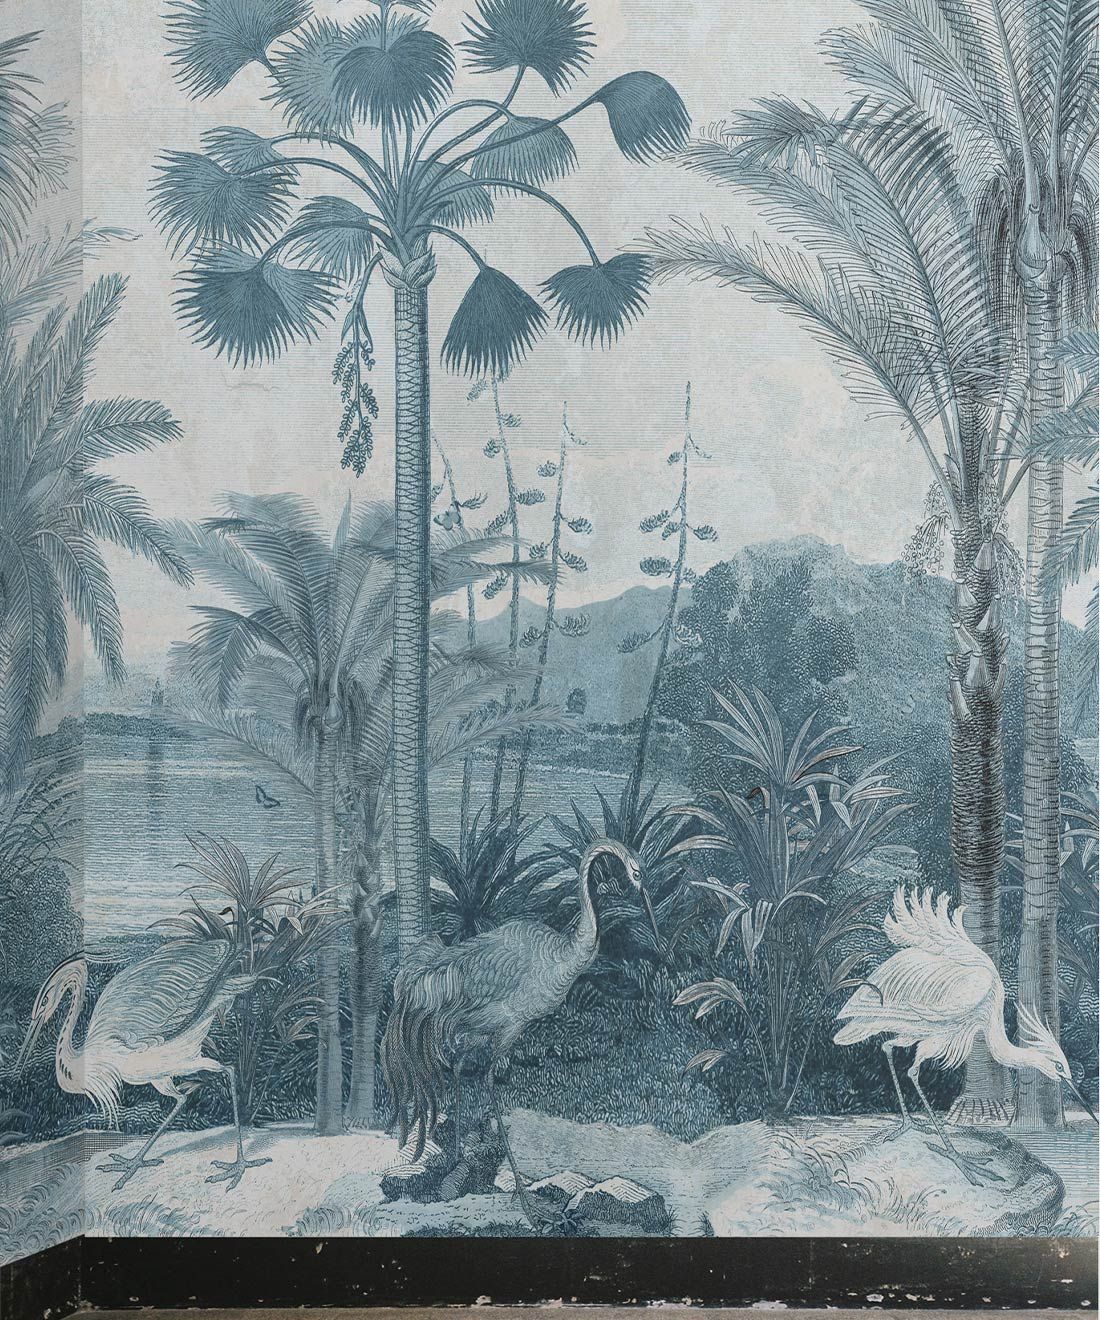 South Asian Subcontinent Wallpaper Mural •Bethany Linz • Palm Tree Mural • Indigo • Insitu